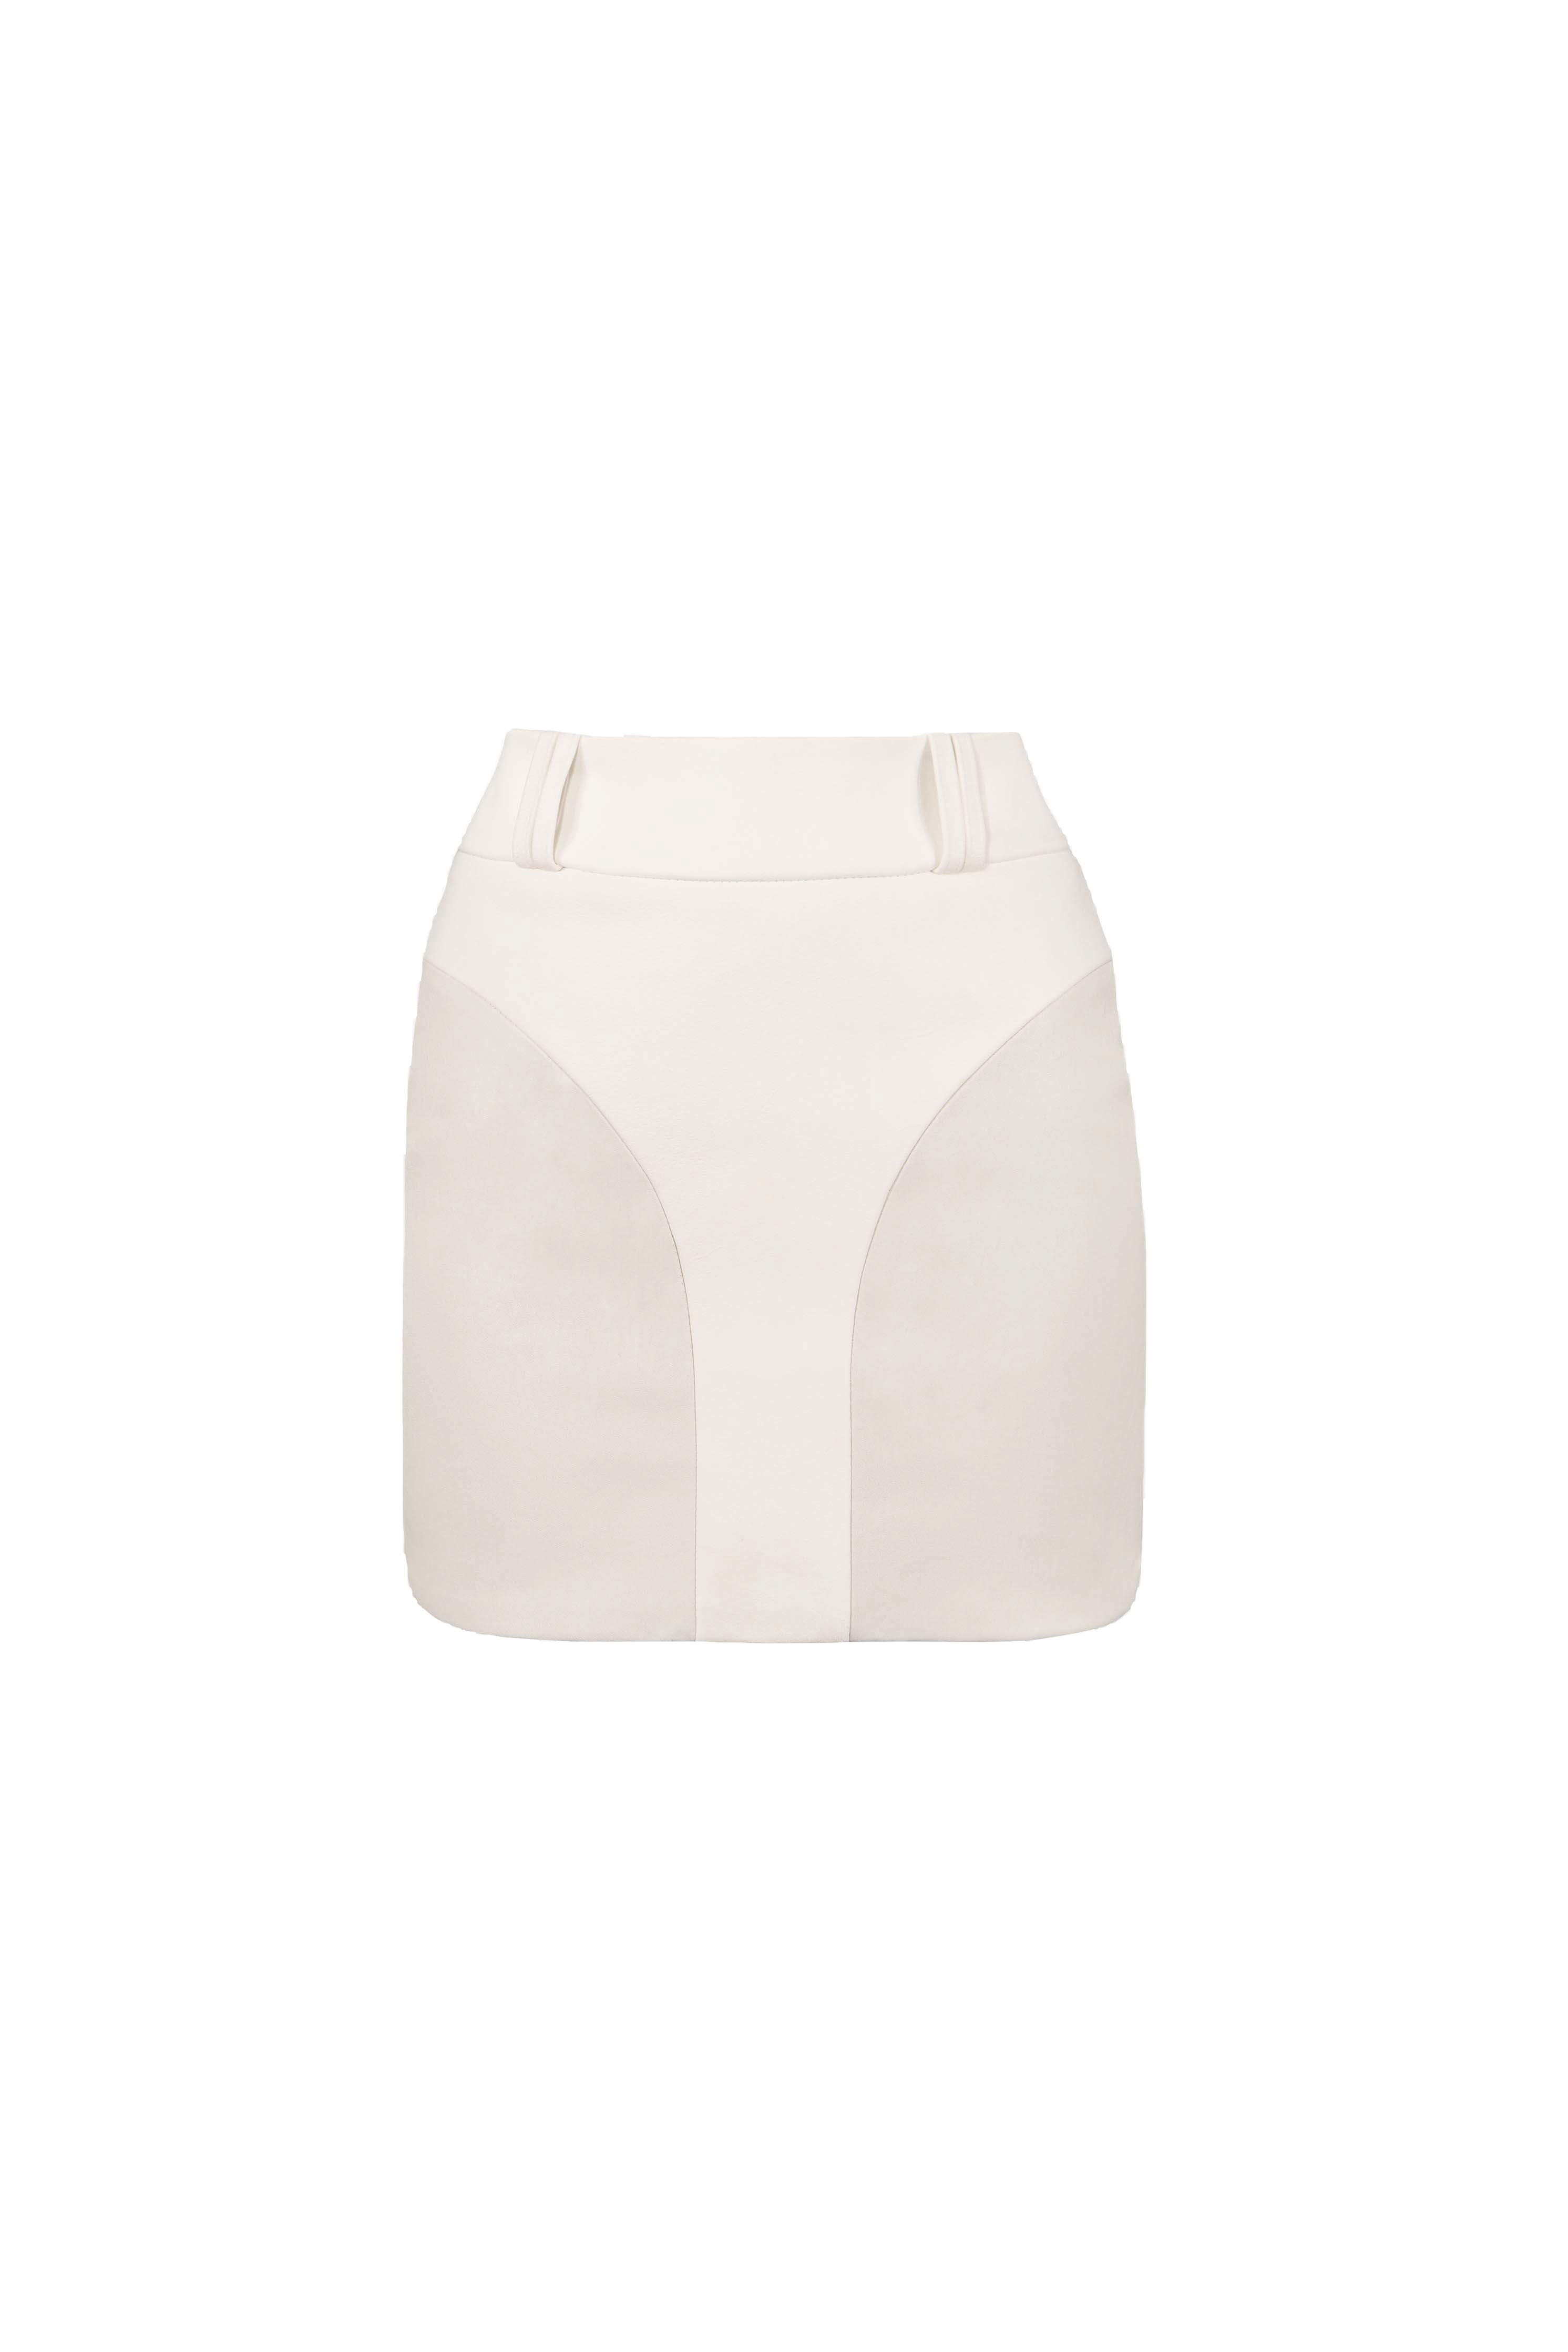 Vol Bliss Leather & Suede Skirt In White